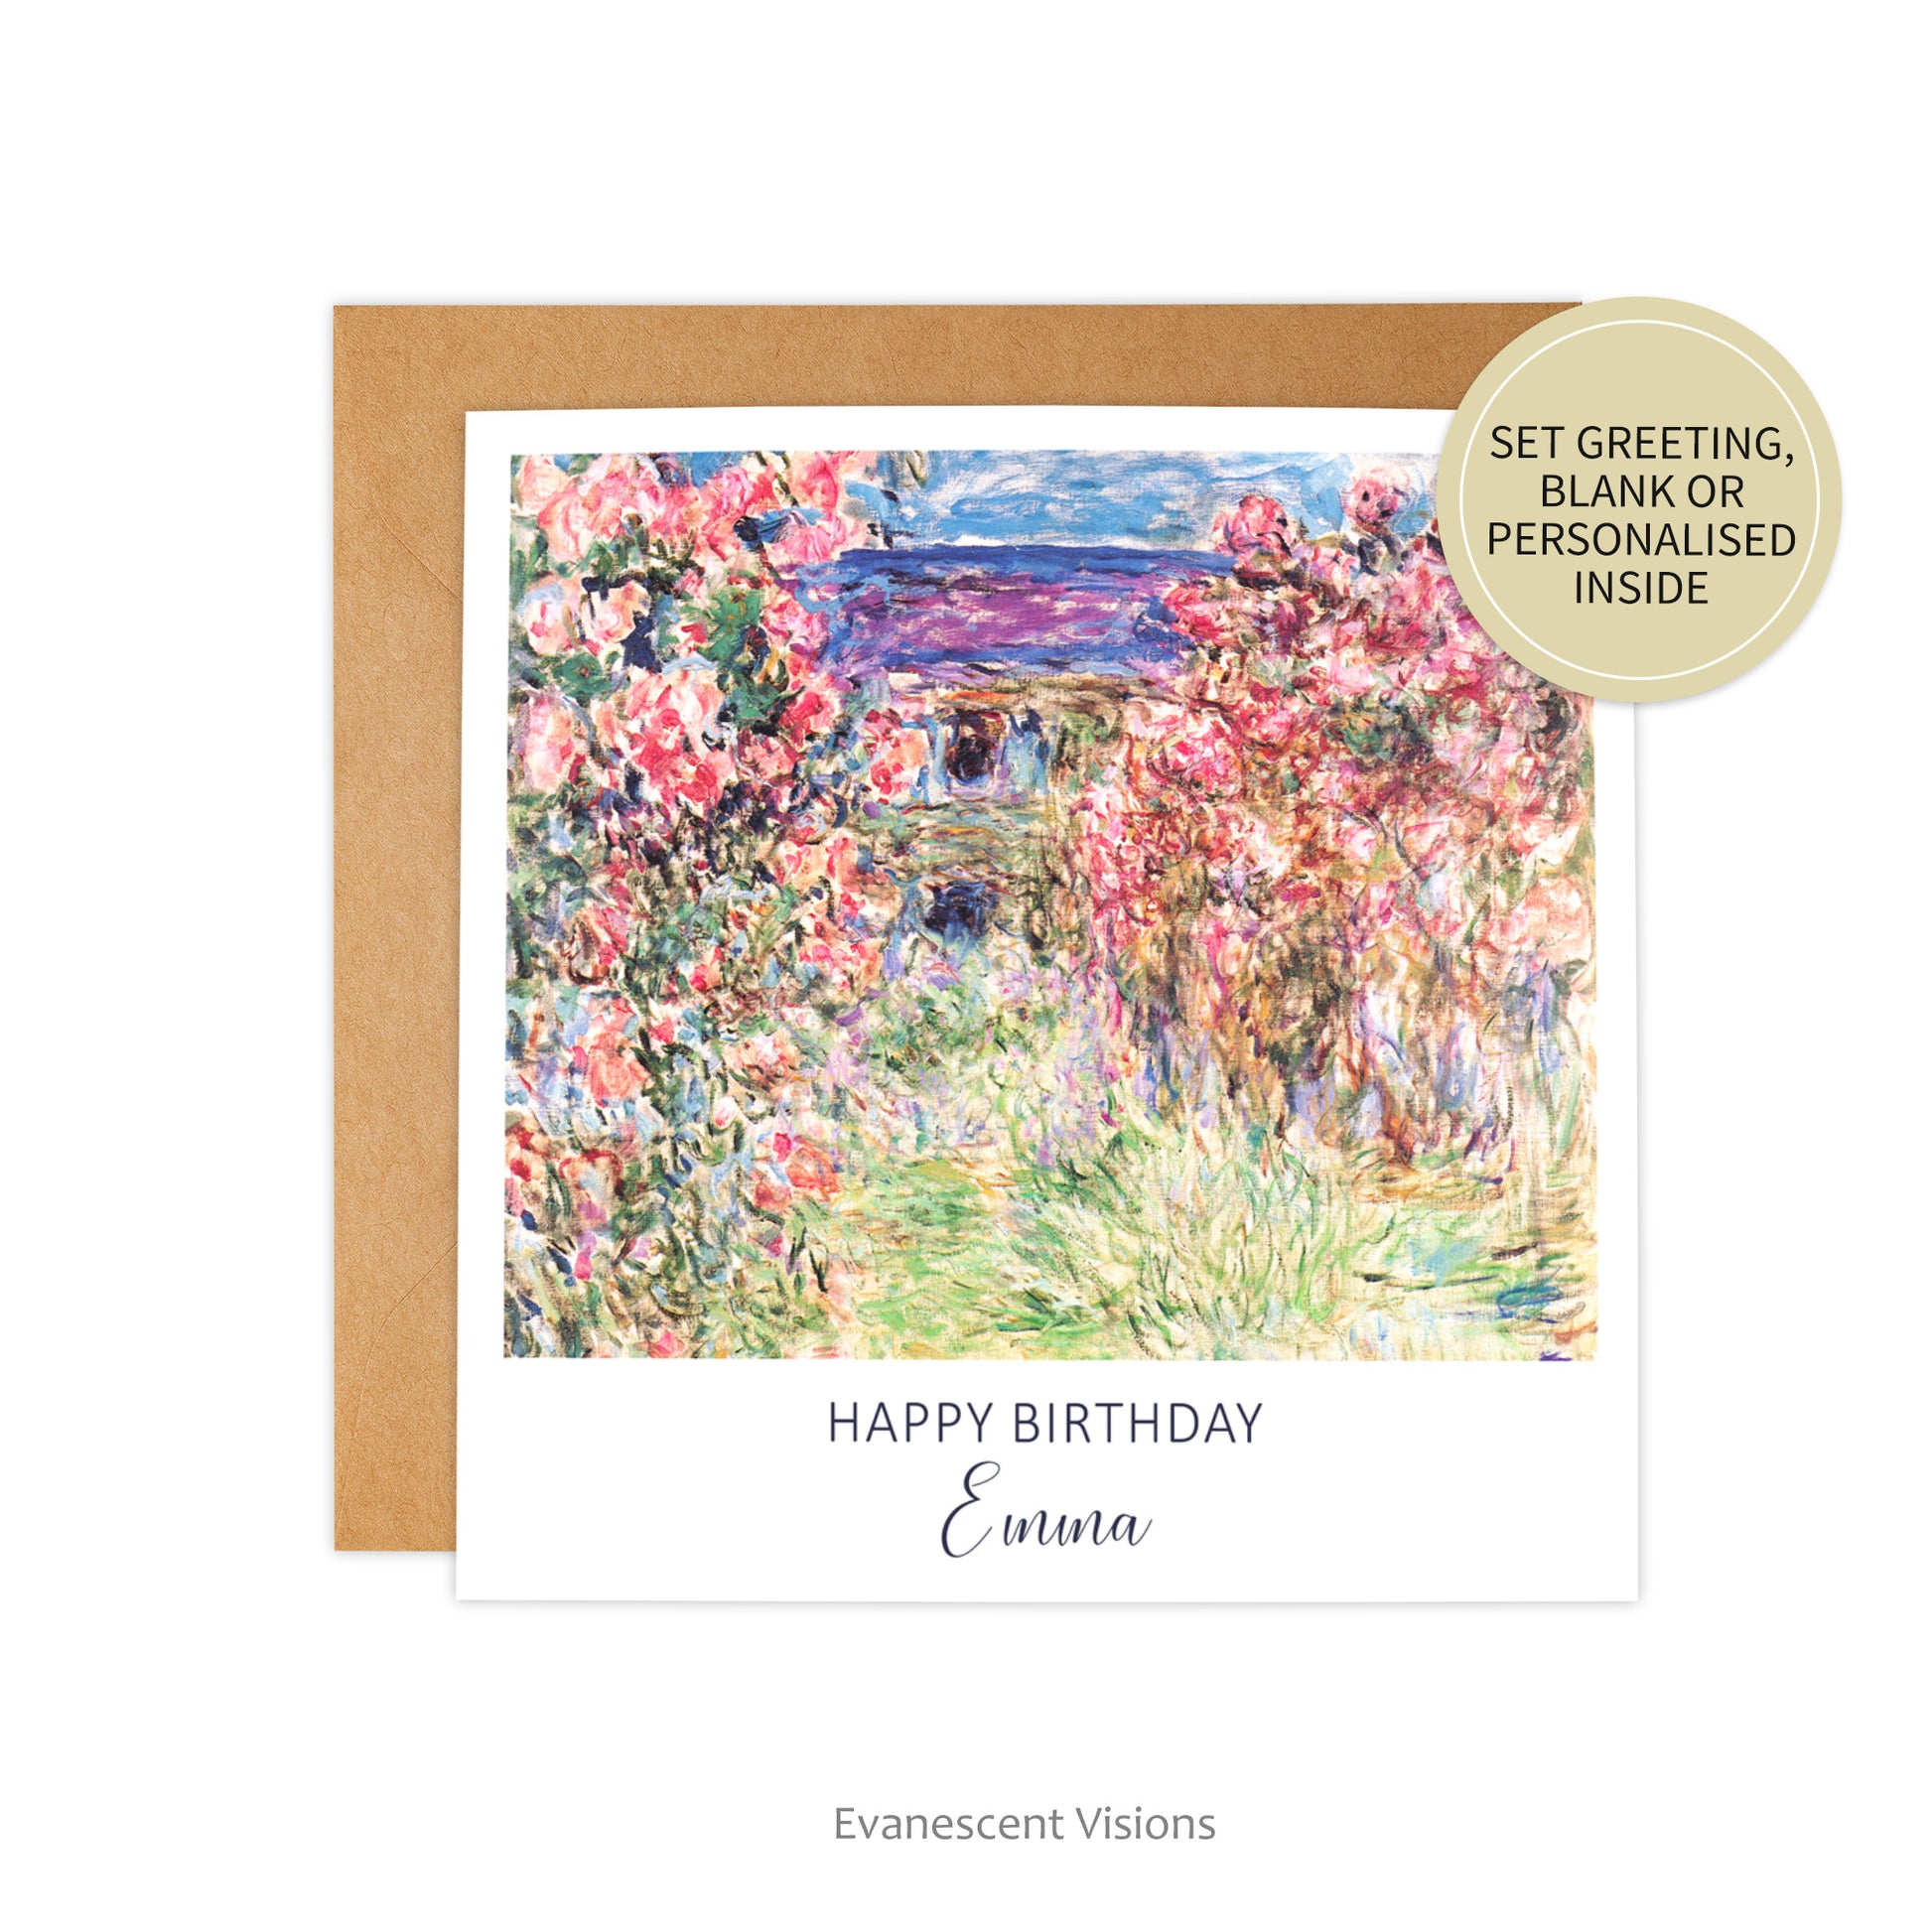 Monet's  The House Among the Roses Personalised Birthday Card with envelope